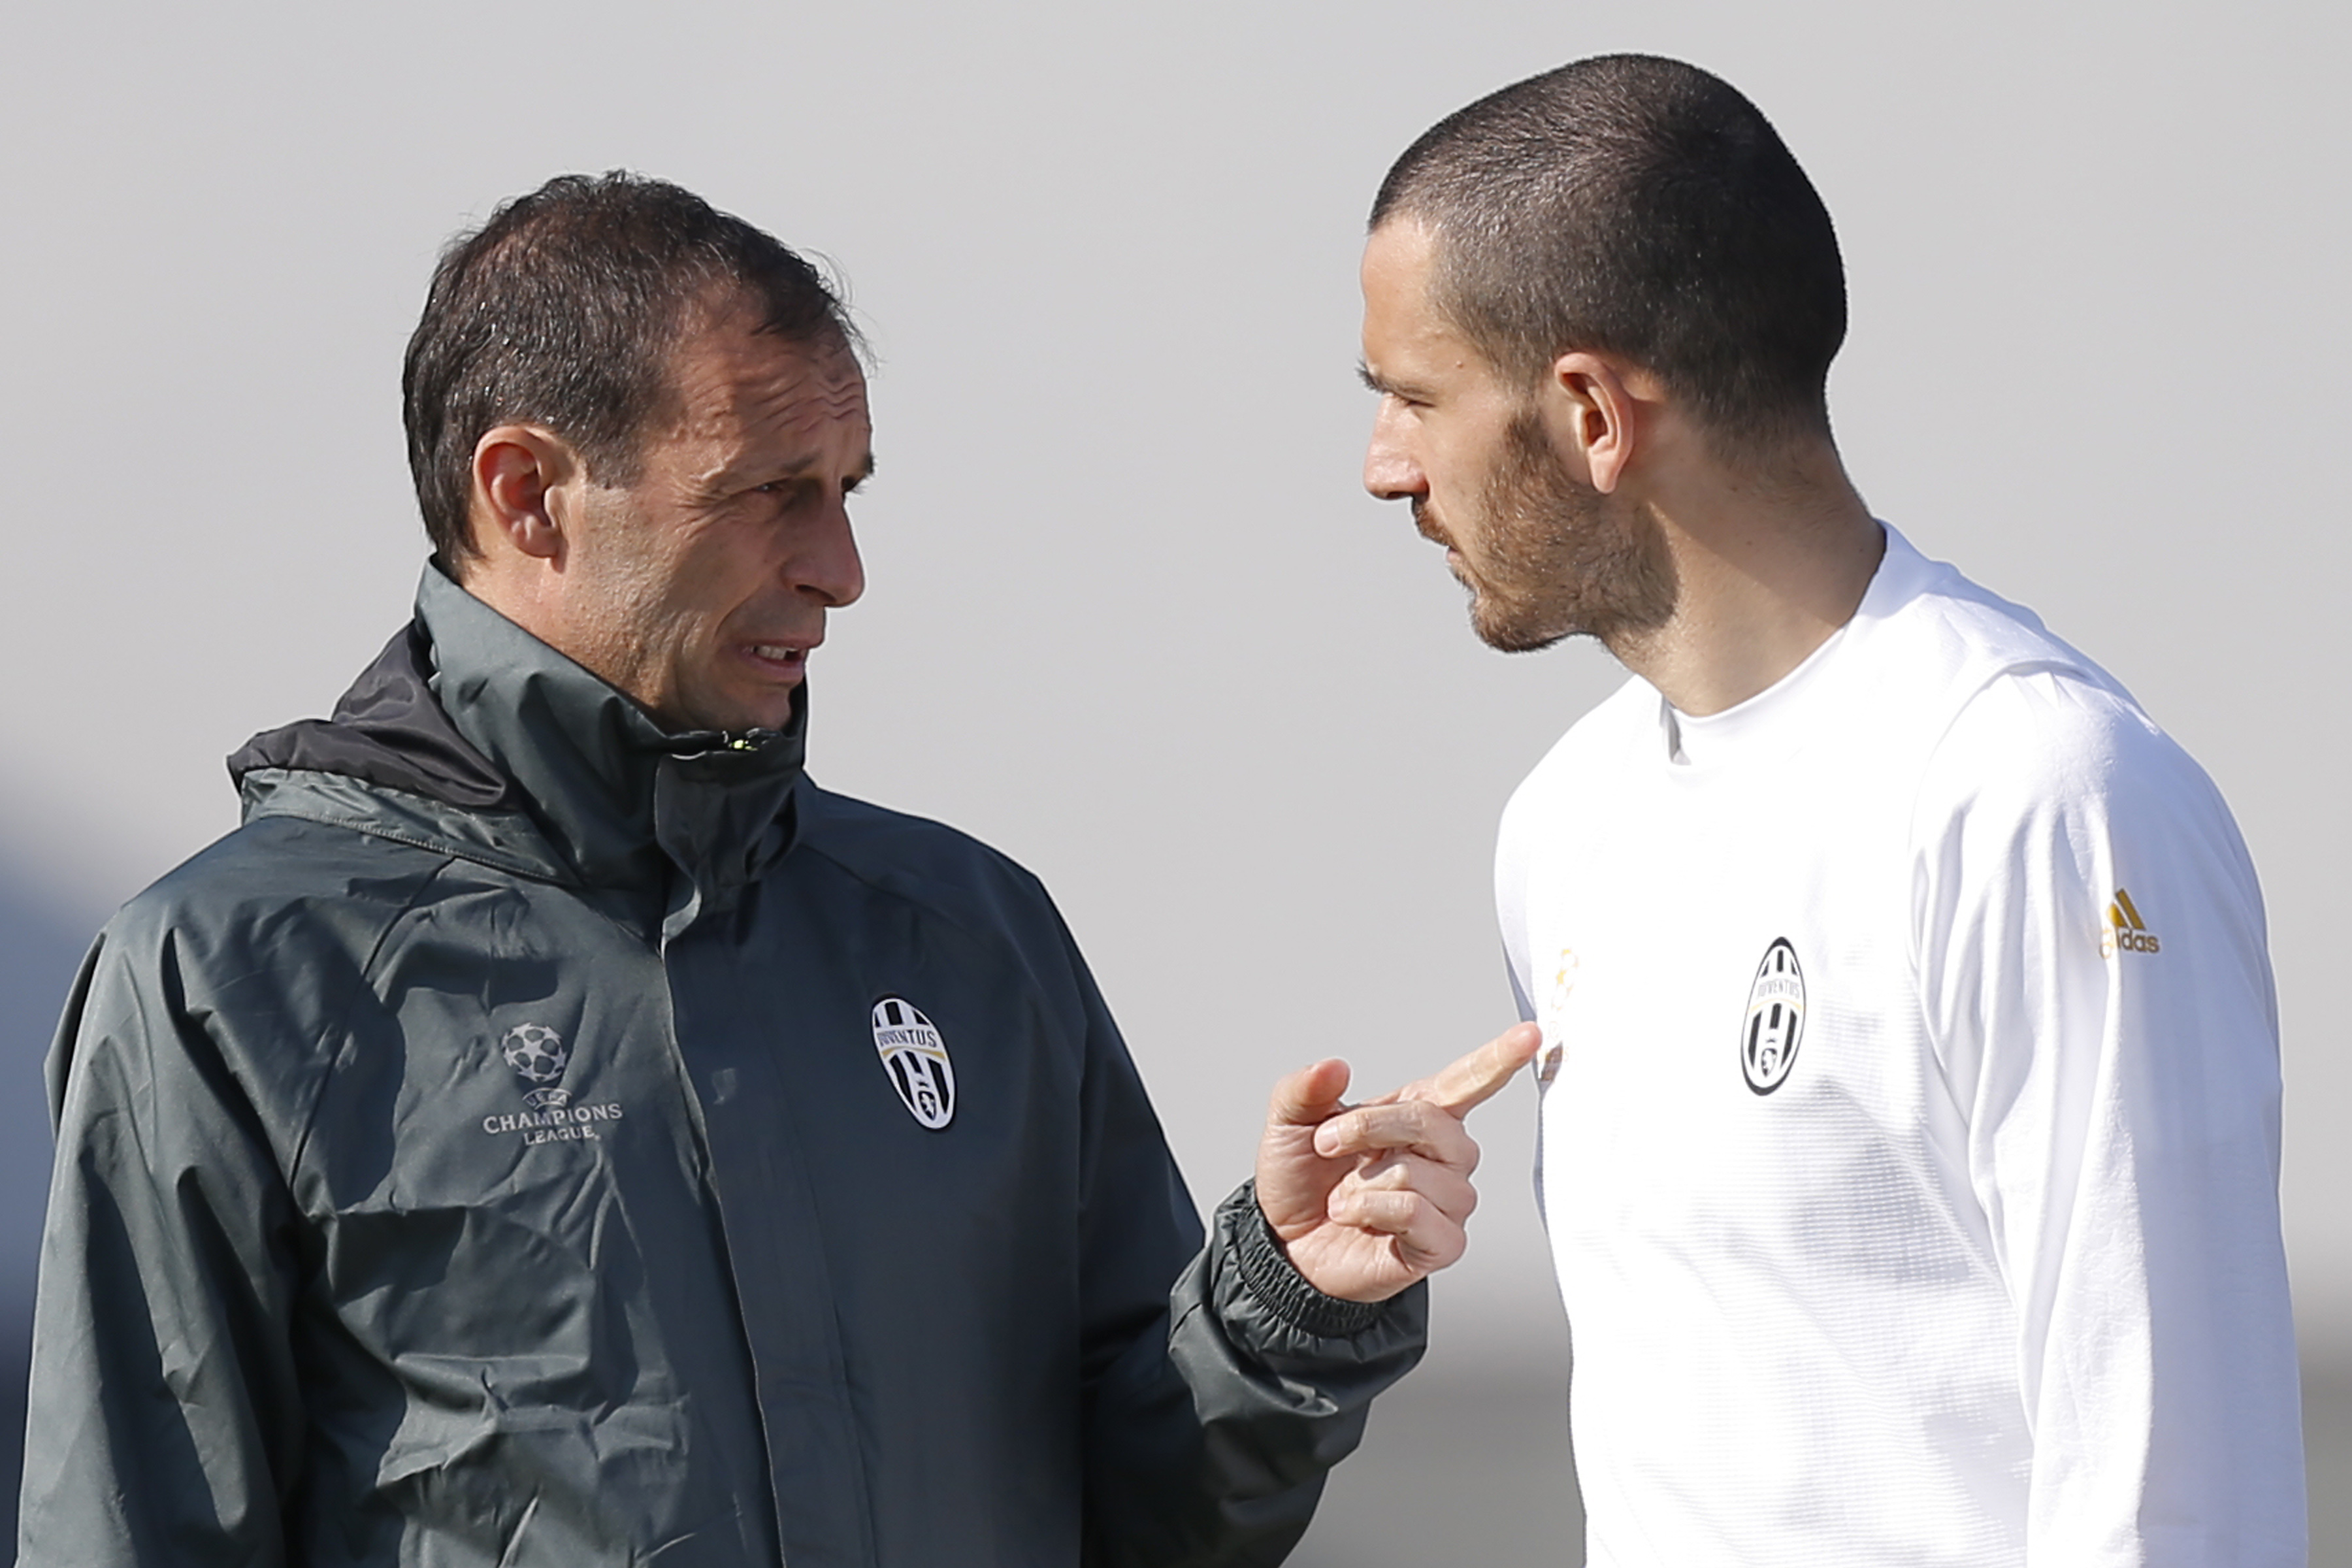 Juventus' coach Massimiliano Allegri (L) chats with Juventus' defender Leonardo Bonucci during a training session on the eve of the UEFA Champions League football match Juventus Vs FC Porto on March 13, 2017 at the 'Juventus Training Center' in Vinovo, near Turin. / AFP PHOTO / Marco BERTORELLO        (Photo credit should read MARCO BERTORELLO/AFP/Getty Images)